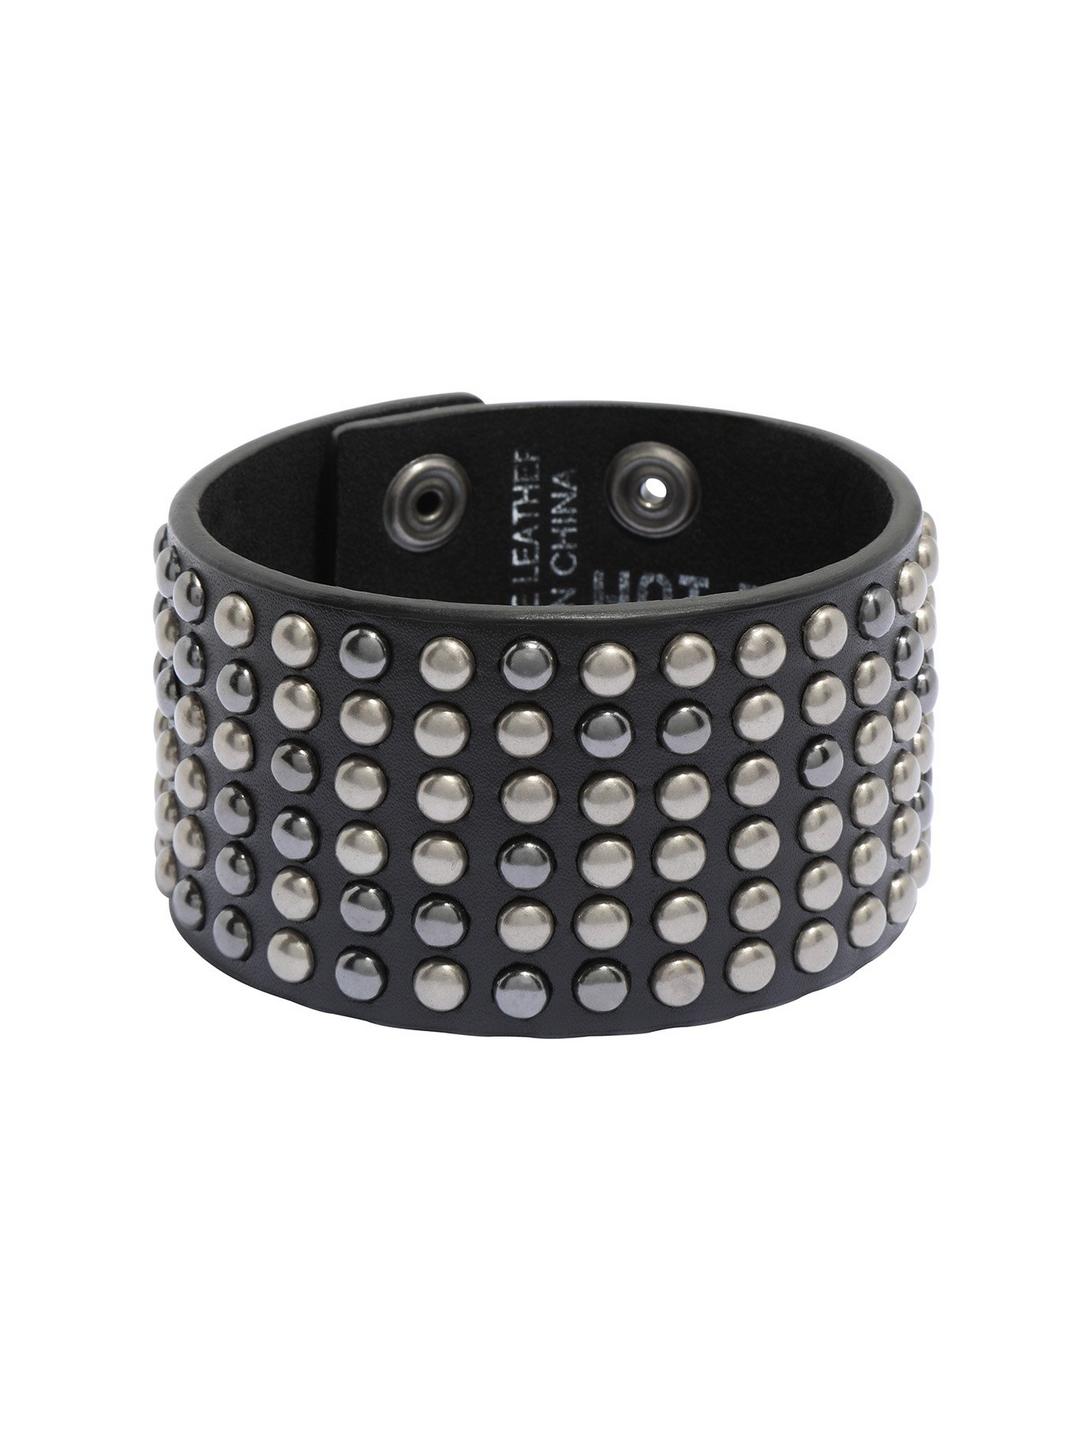 Black Faux Leather 6 Row Round Stud Cuff, , hi-res